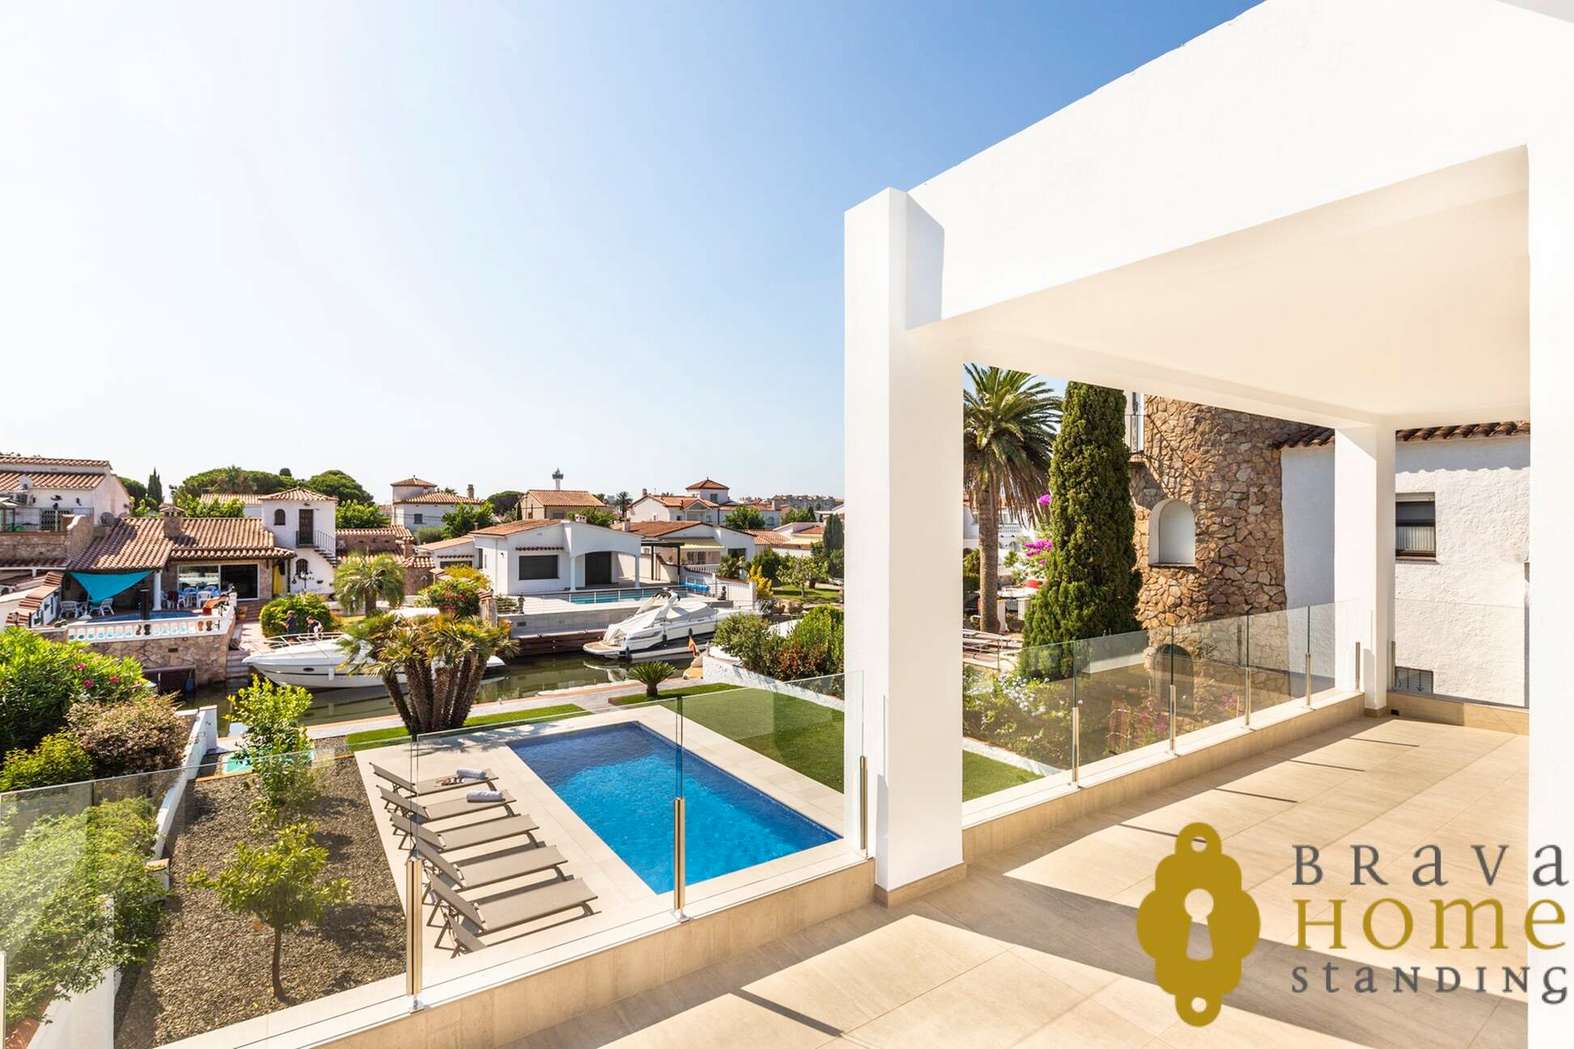 Design property with 13,5m mooring, pool and garage in Empuriabrava